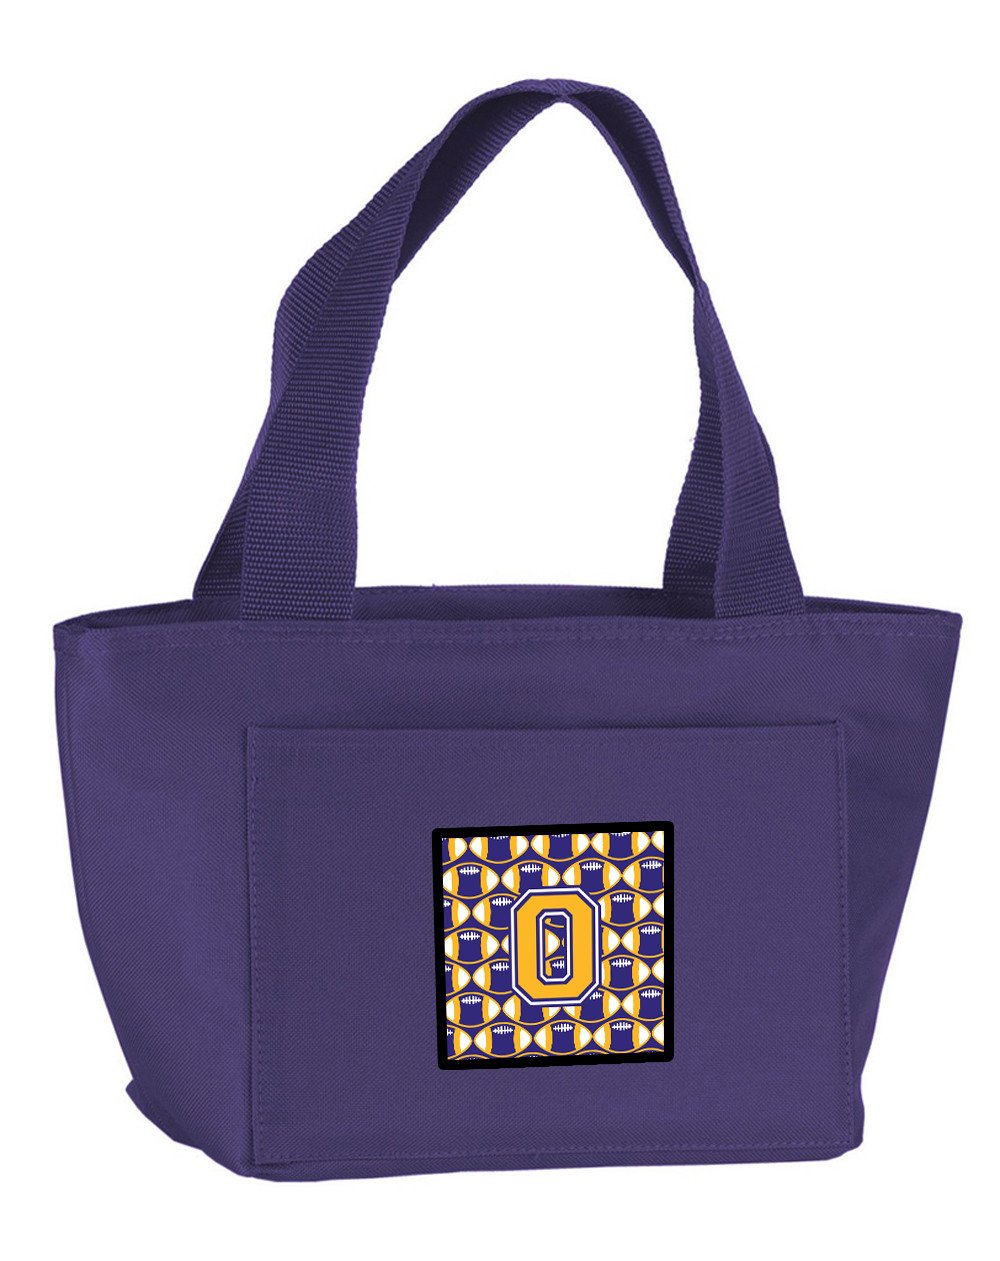 Letter O Football Purple and Gold Lunch Bag CJ1064-OPR-8808 by Caroline's Treasures